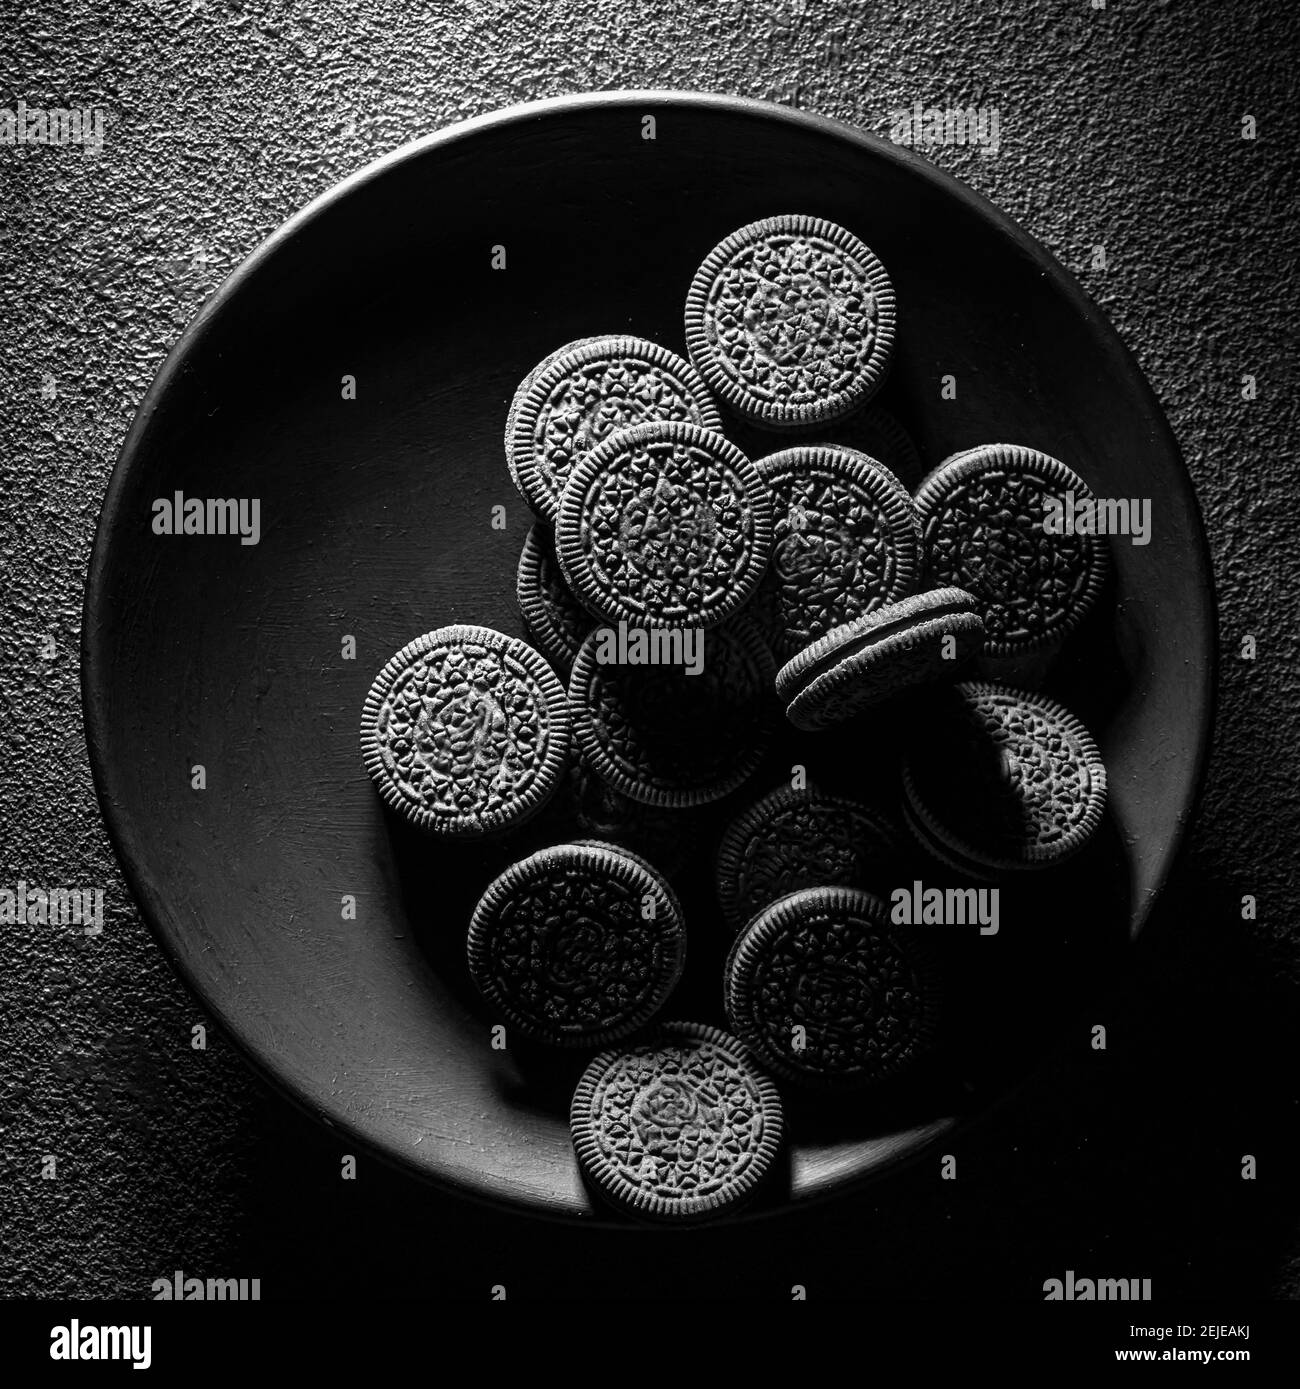 textured cookies in a black plate on a dark background, art food concept, square photo. Stock Photo